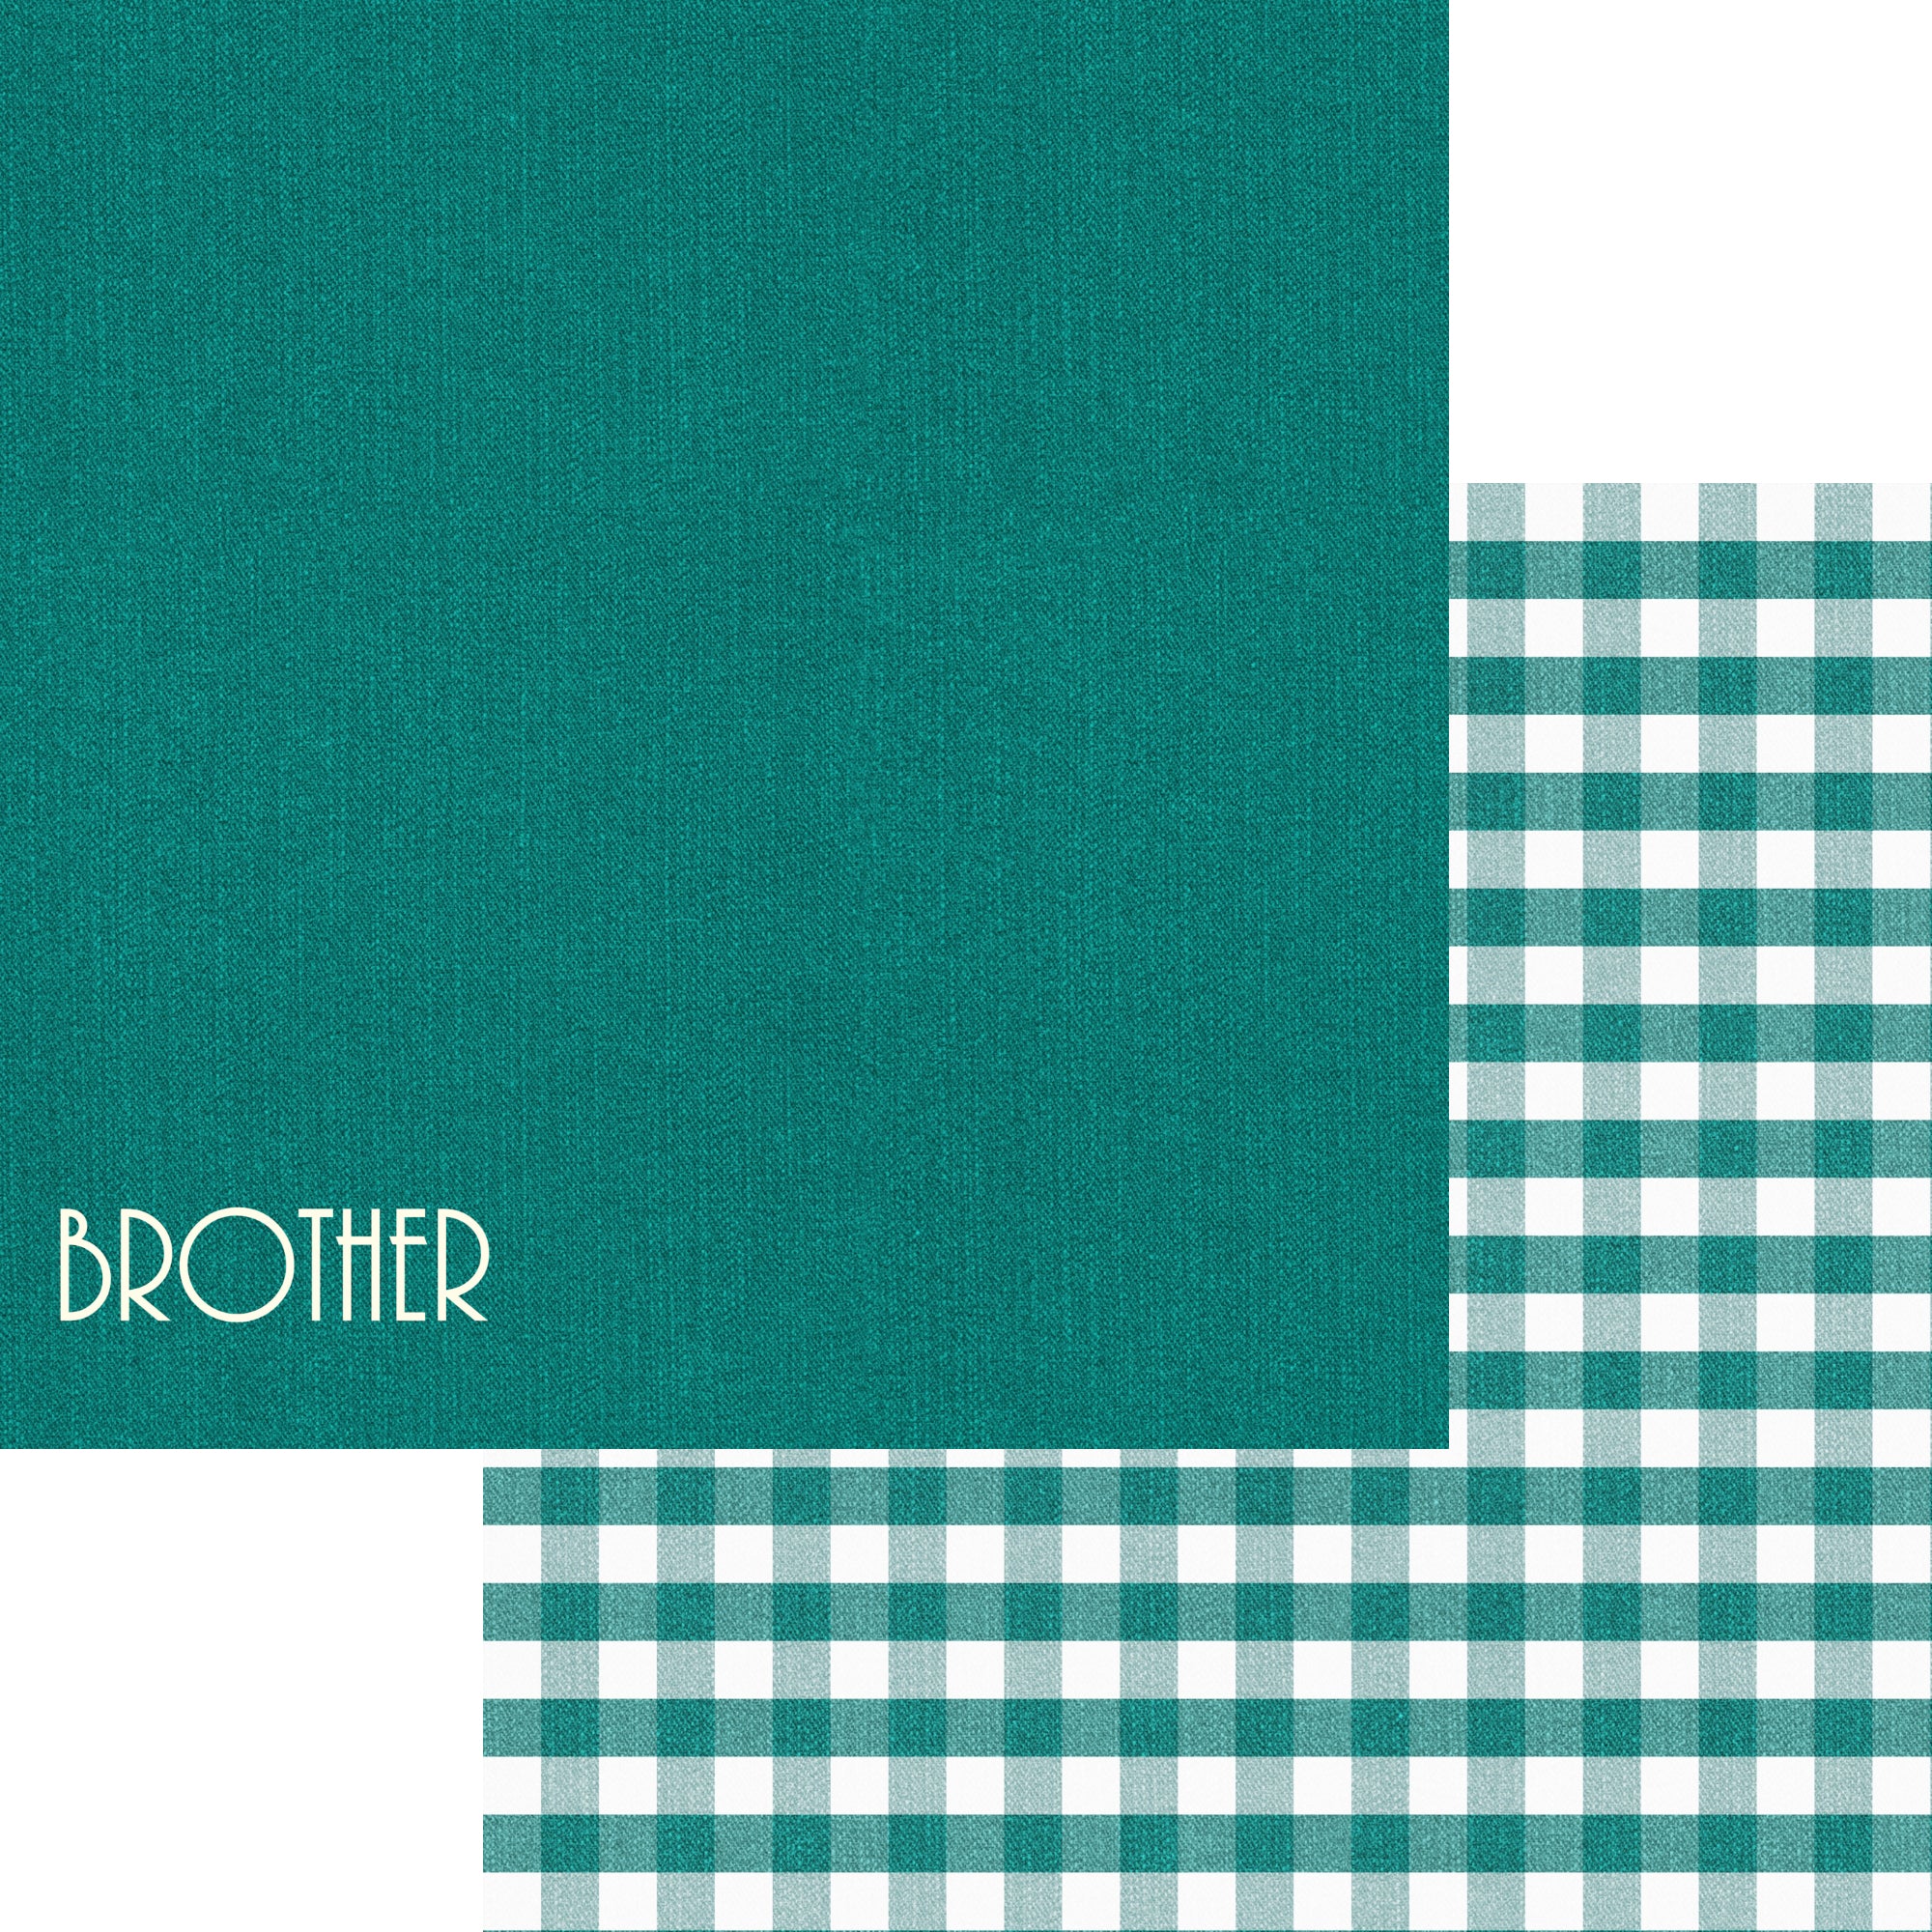 Family Collection Brother 12 x 12 Double-Sided Scrapbook Paper by SSC Designs